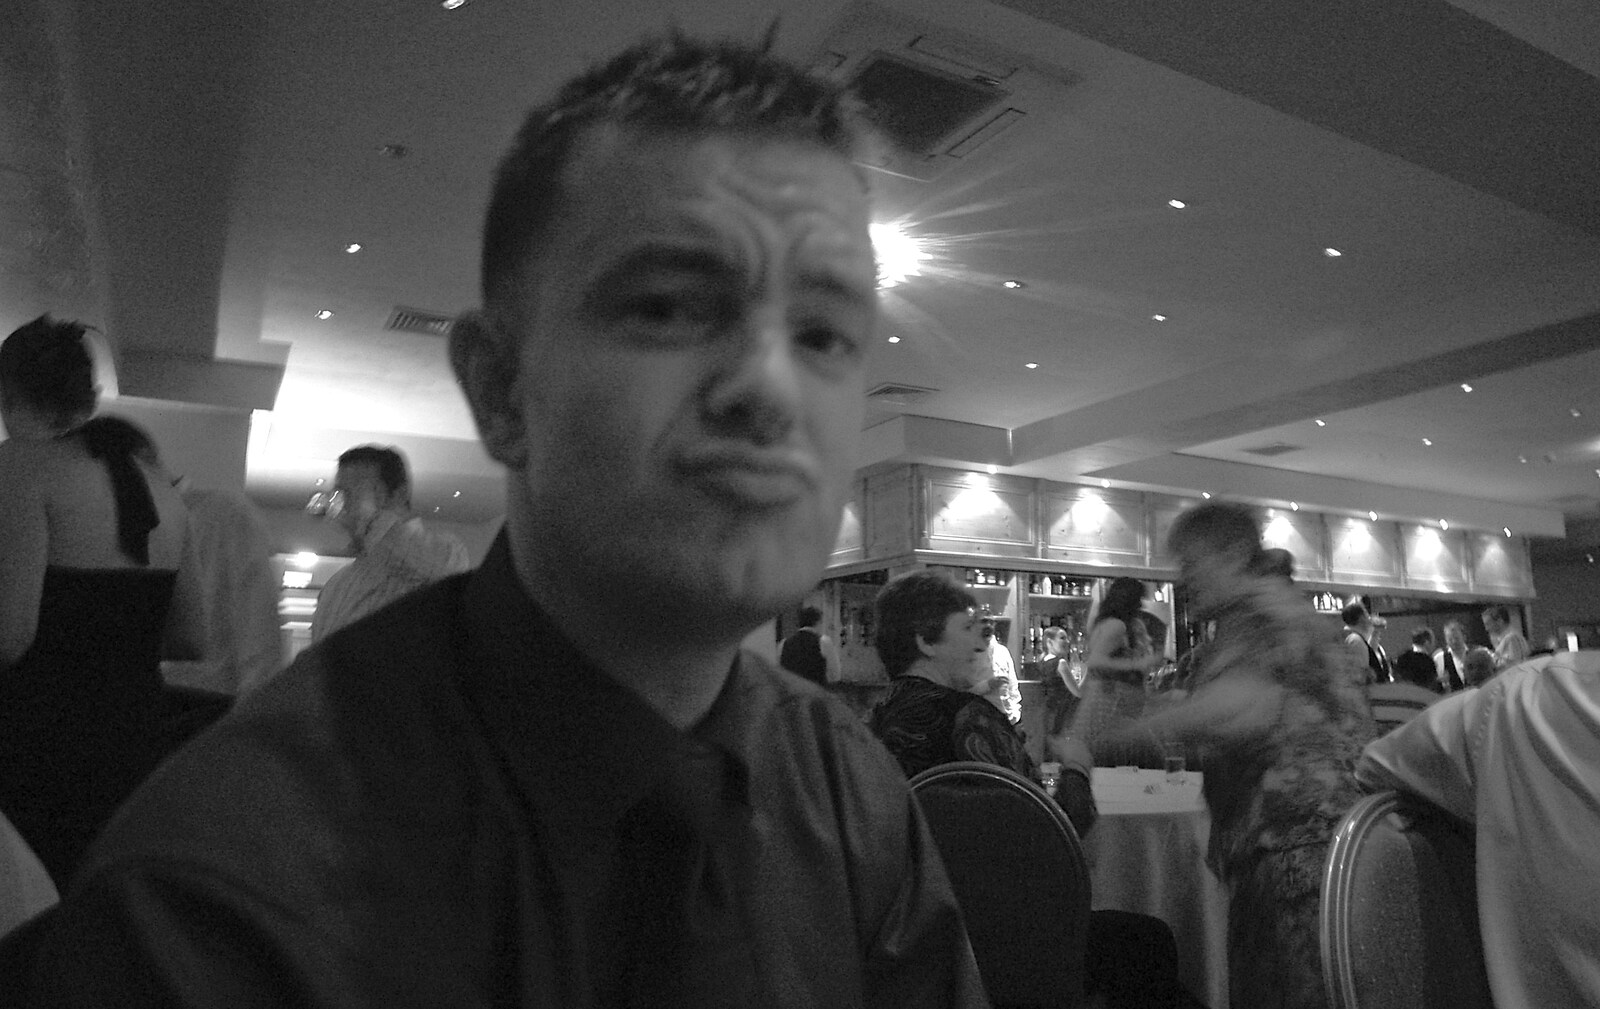 Nosher from Caroline and Chris's Wedding, Spanish Point, County Clare, Ireland - 26th October 2006